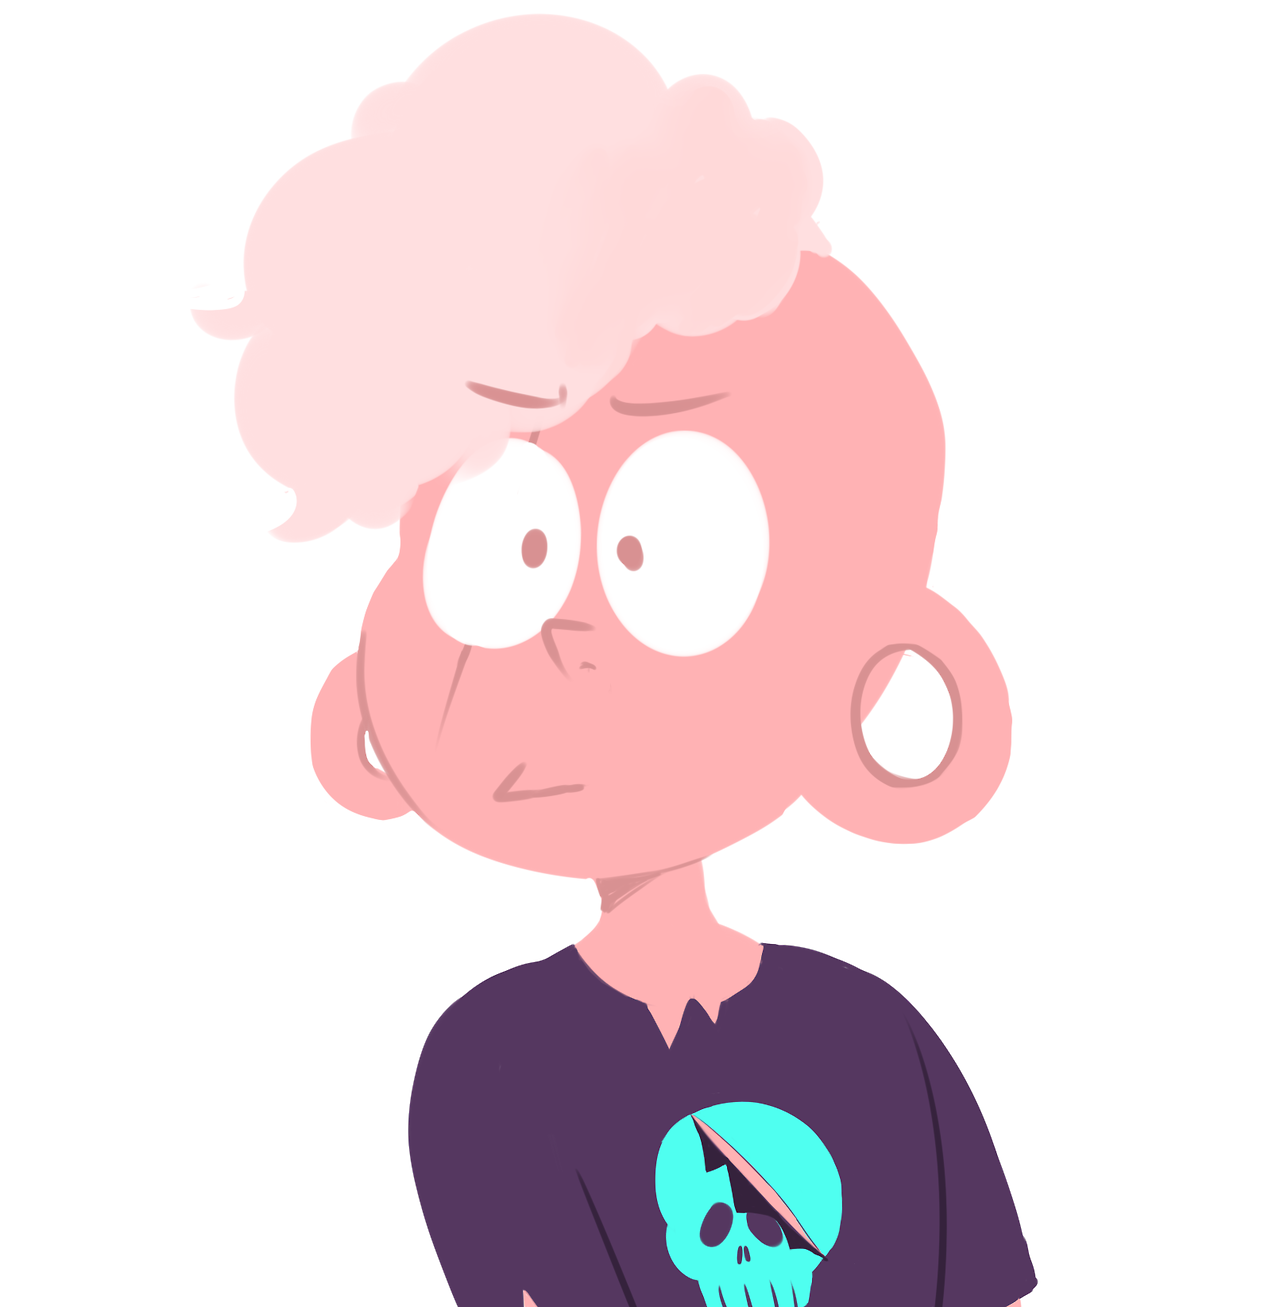 i wasnt gonna watch the new episode, but i caved. i love lars too much.